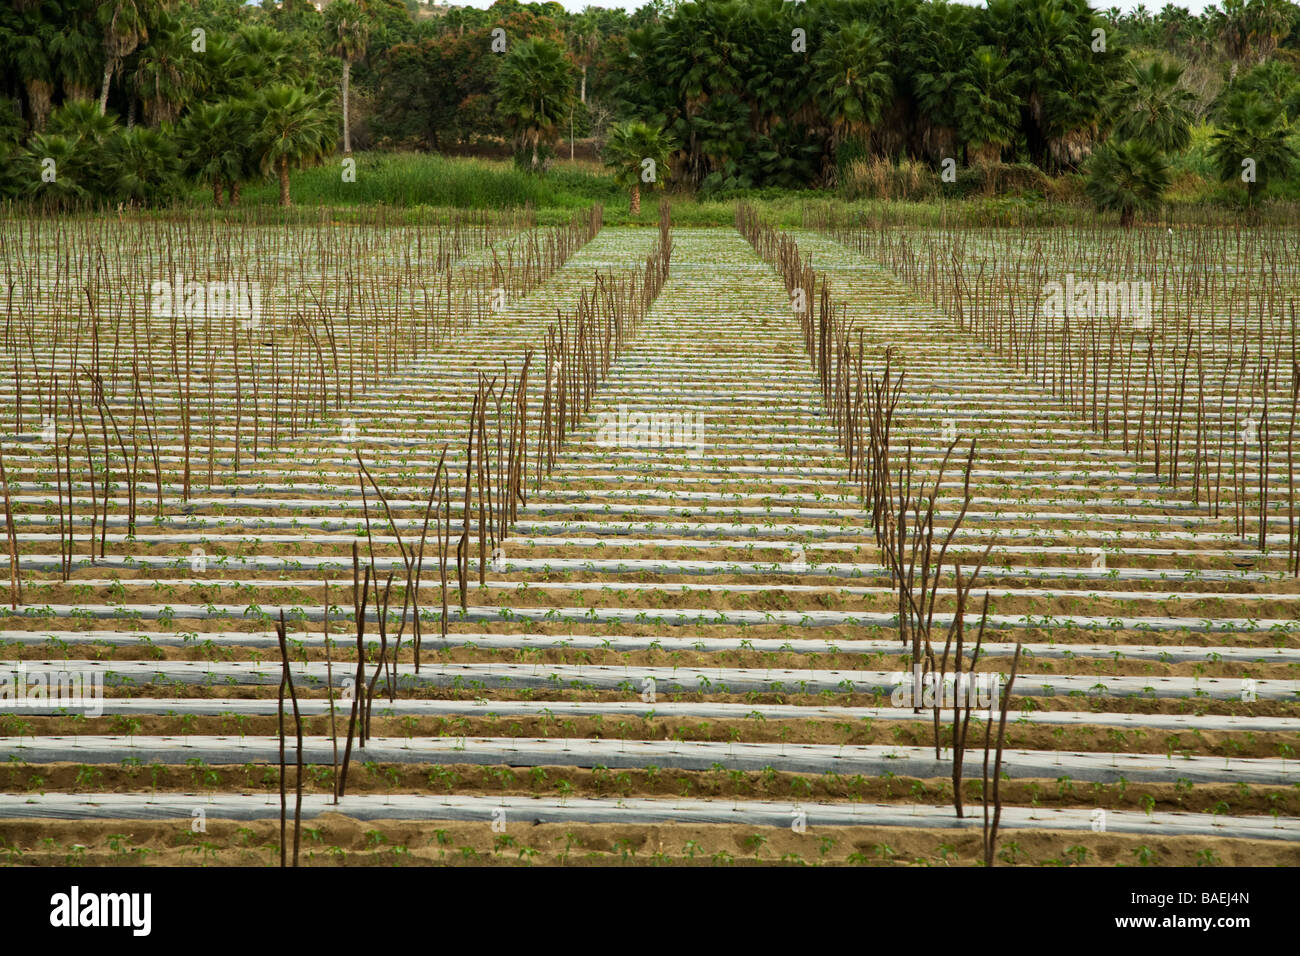 MEXICO Todos Santos Rows of seedling pepper plants in agricultural field wooden stakes for support of cover Stock Photo